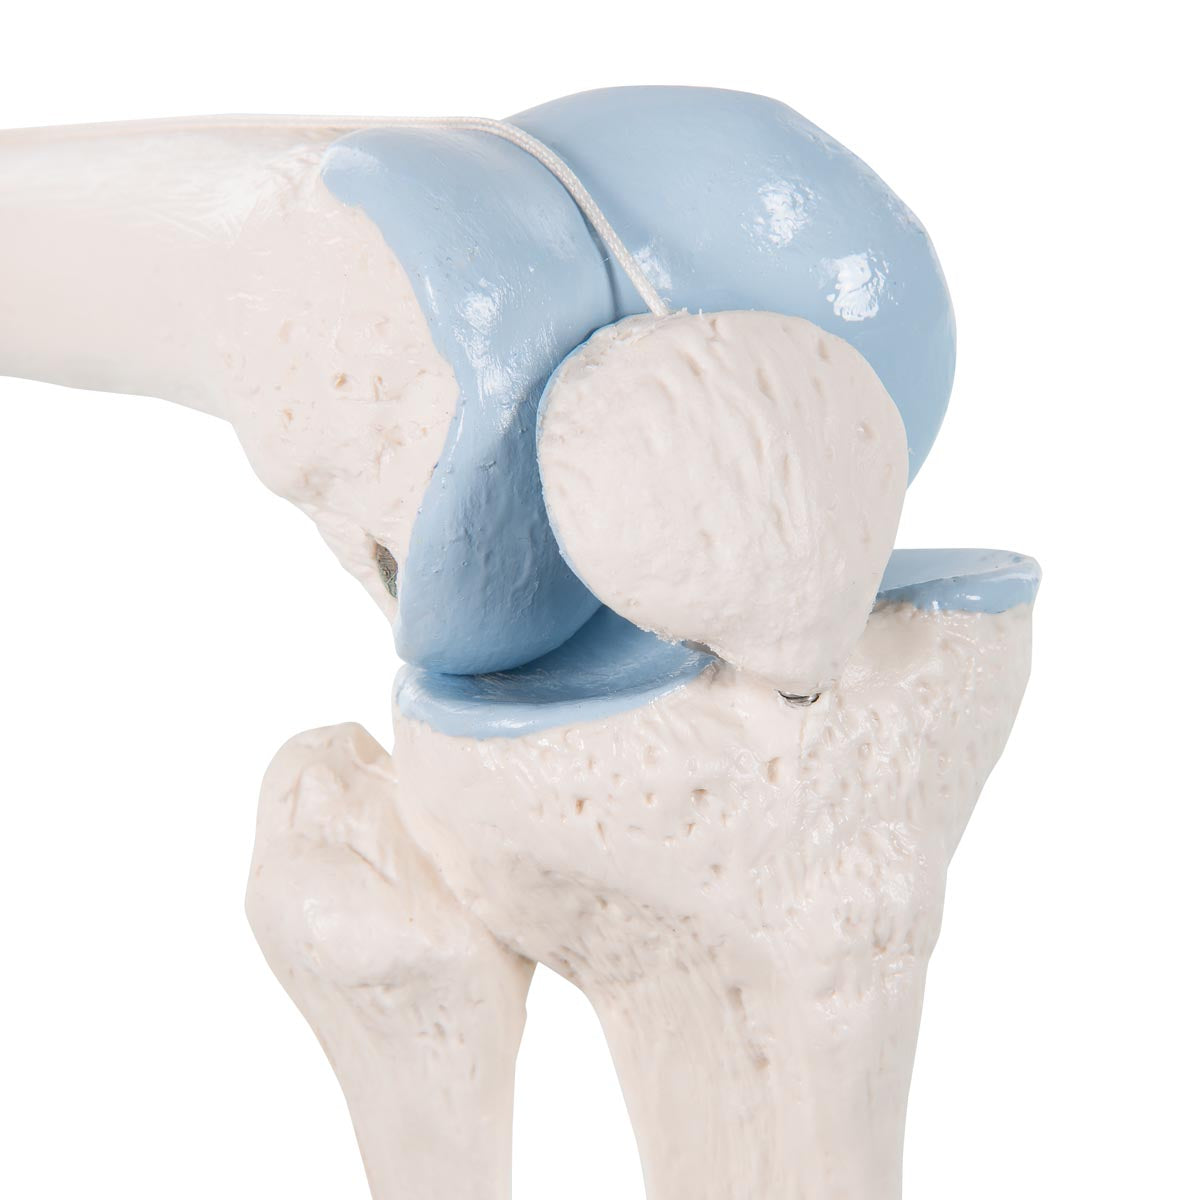 Reduced knee model with colored joint surfaces plus a cross section of the knee joint